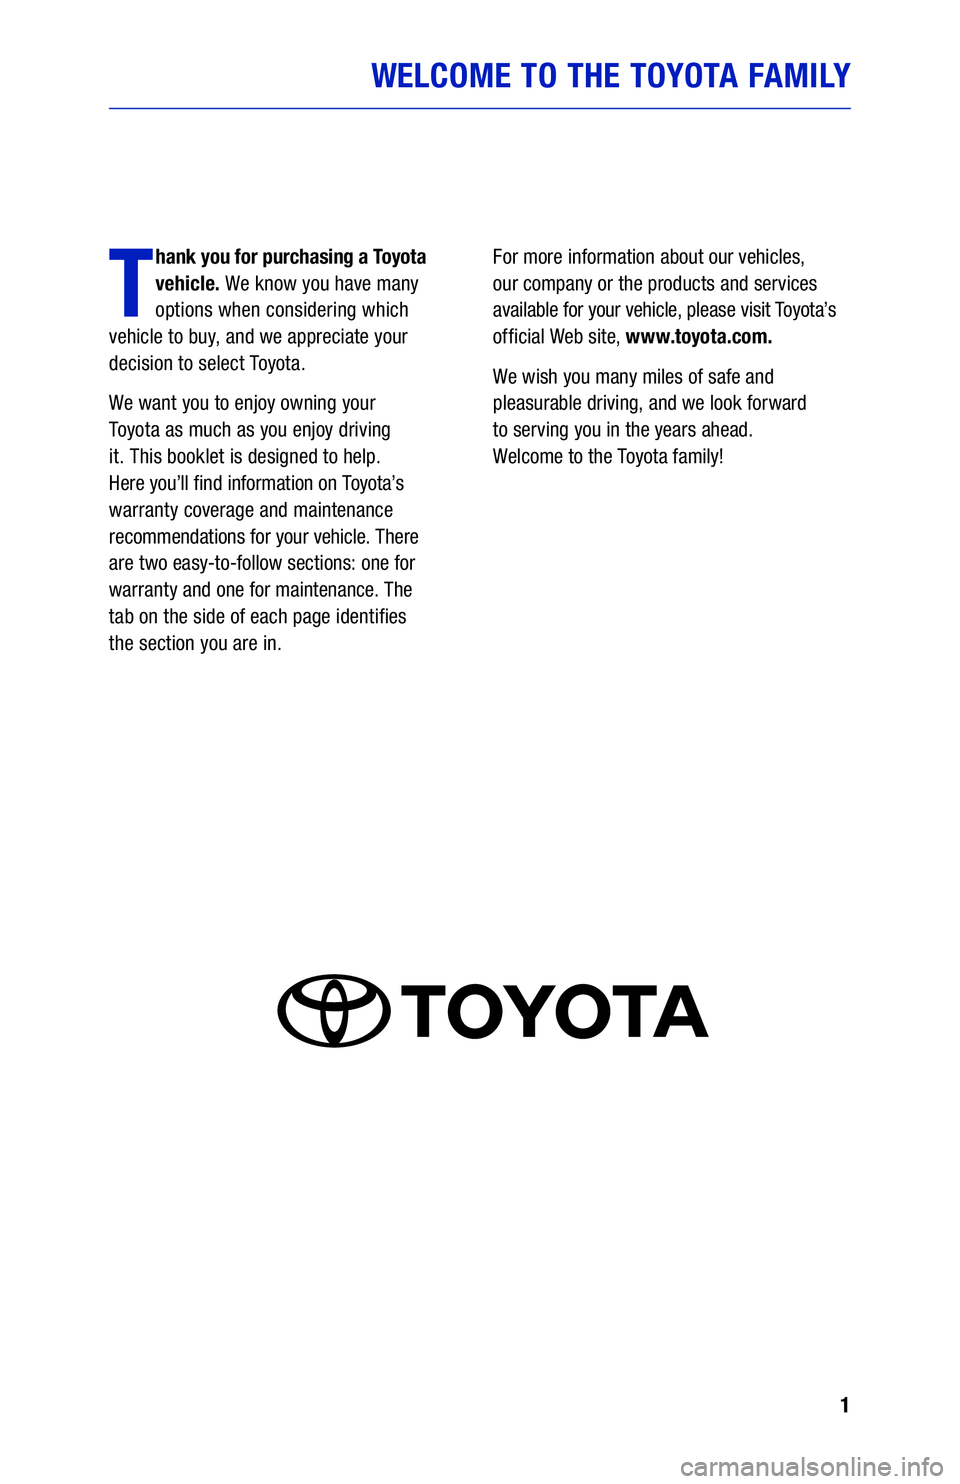 TOYOTA SIENNA 2020  Warranties & Maintenance Guides (in English) 1
WELCOME TO THE TOYOTA FAMILY
T
hank you for purchasing a Toyota 
vehicle. We know you have many 
options when considering which  
vehicle to buy, and we appreciate your 
decision to select Toyota.
W